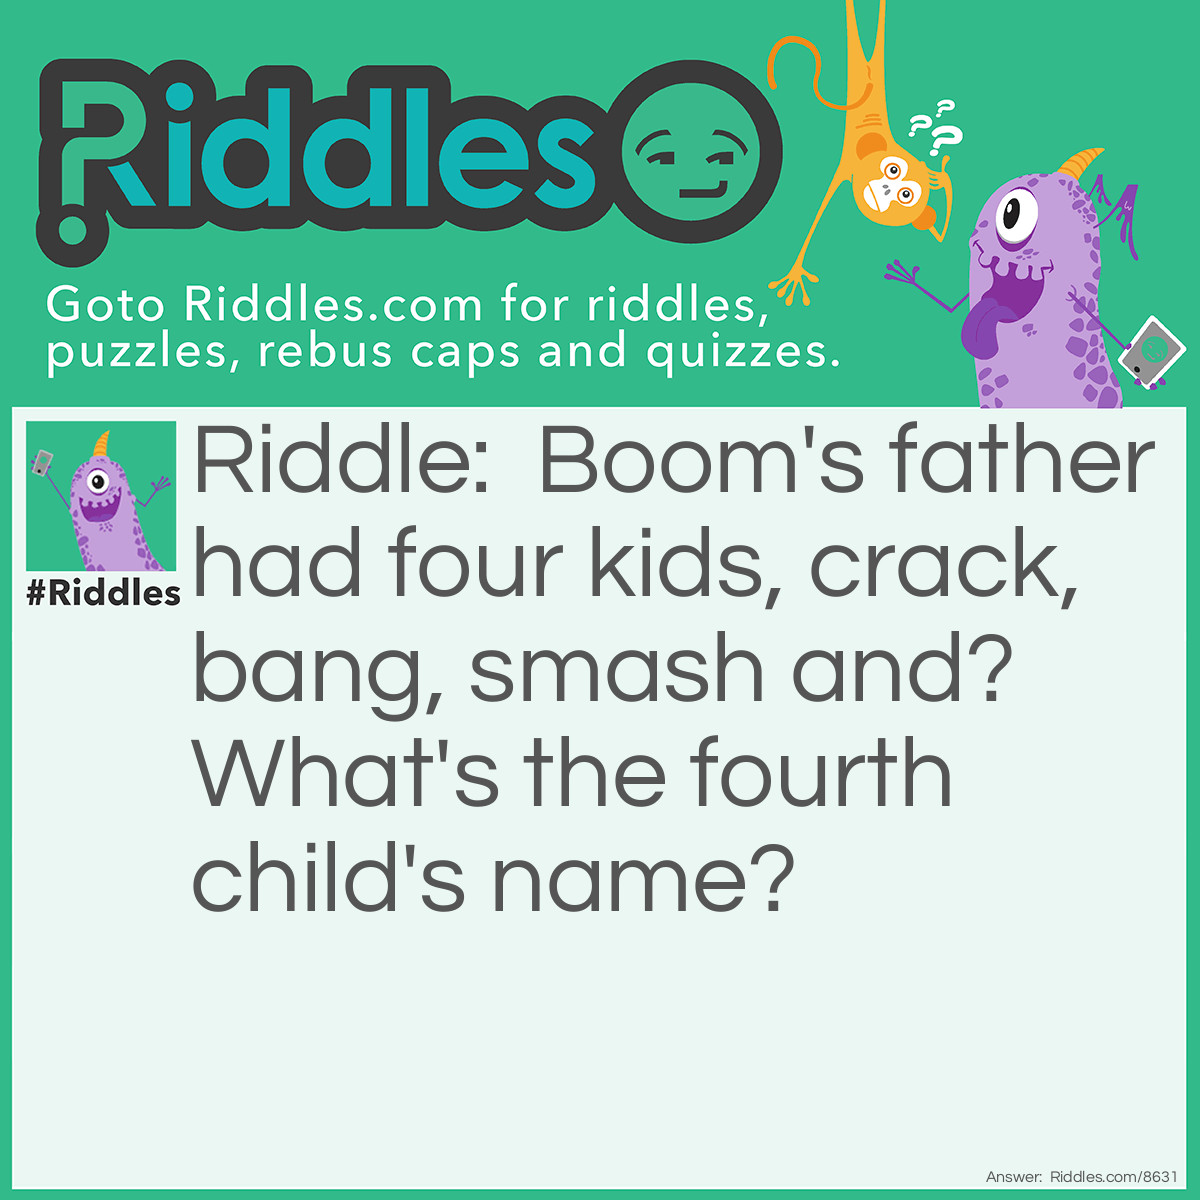 Riddle: Boom's father had four kids, crack, bang, smash and? What's the fourth child's name? Answer: Boom. Because If you read the riddle it says, BOOM"S FATHER.